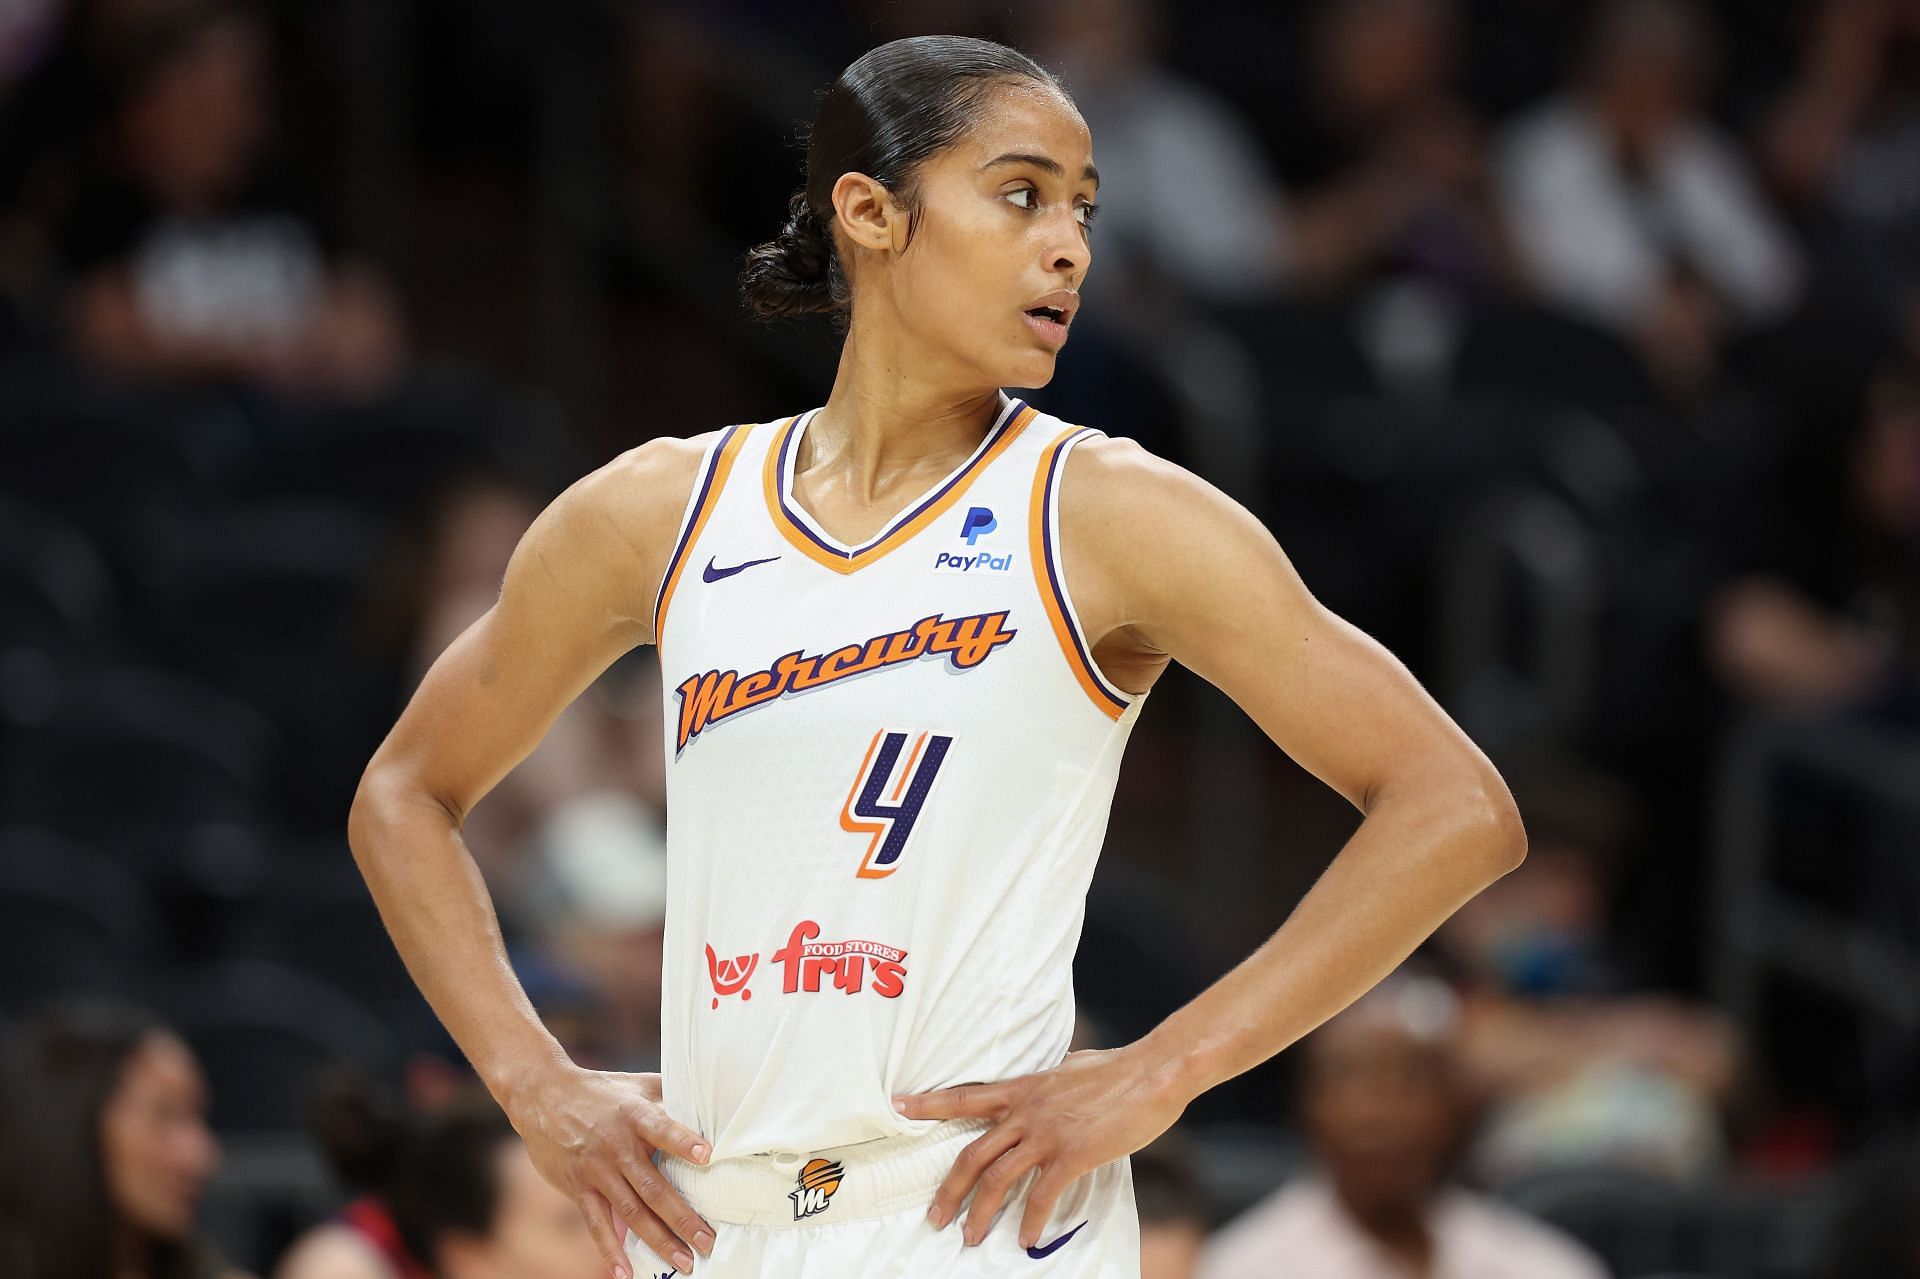 Skylar Diggins-Smith in action for the Phoenix Mercury